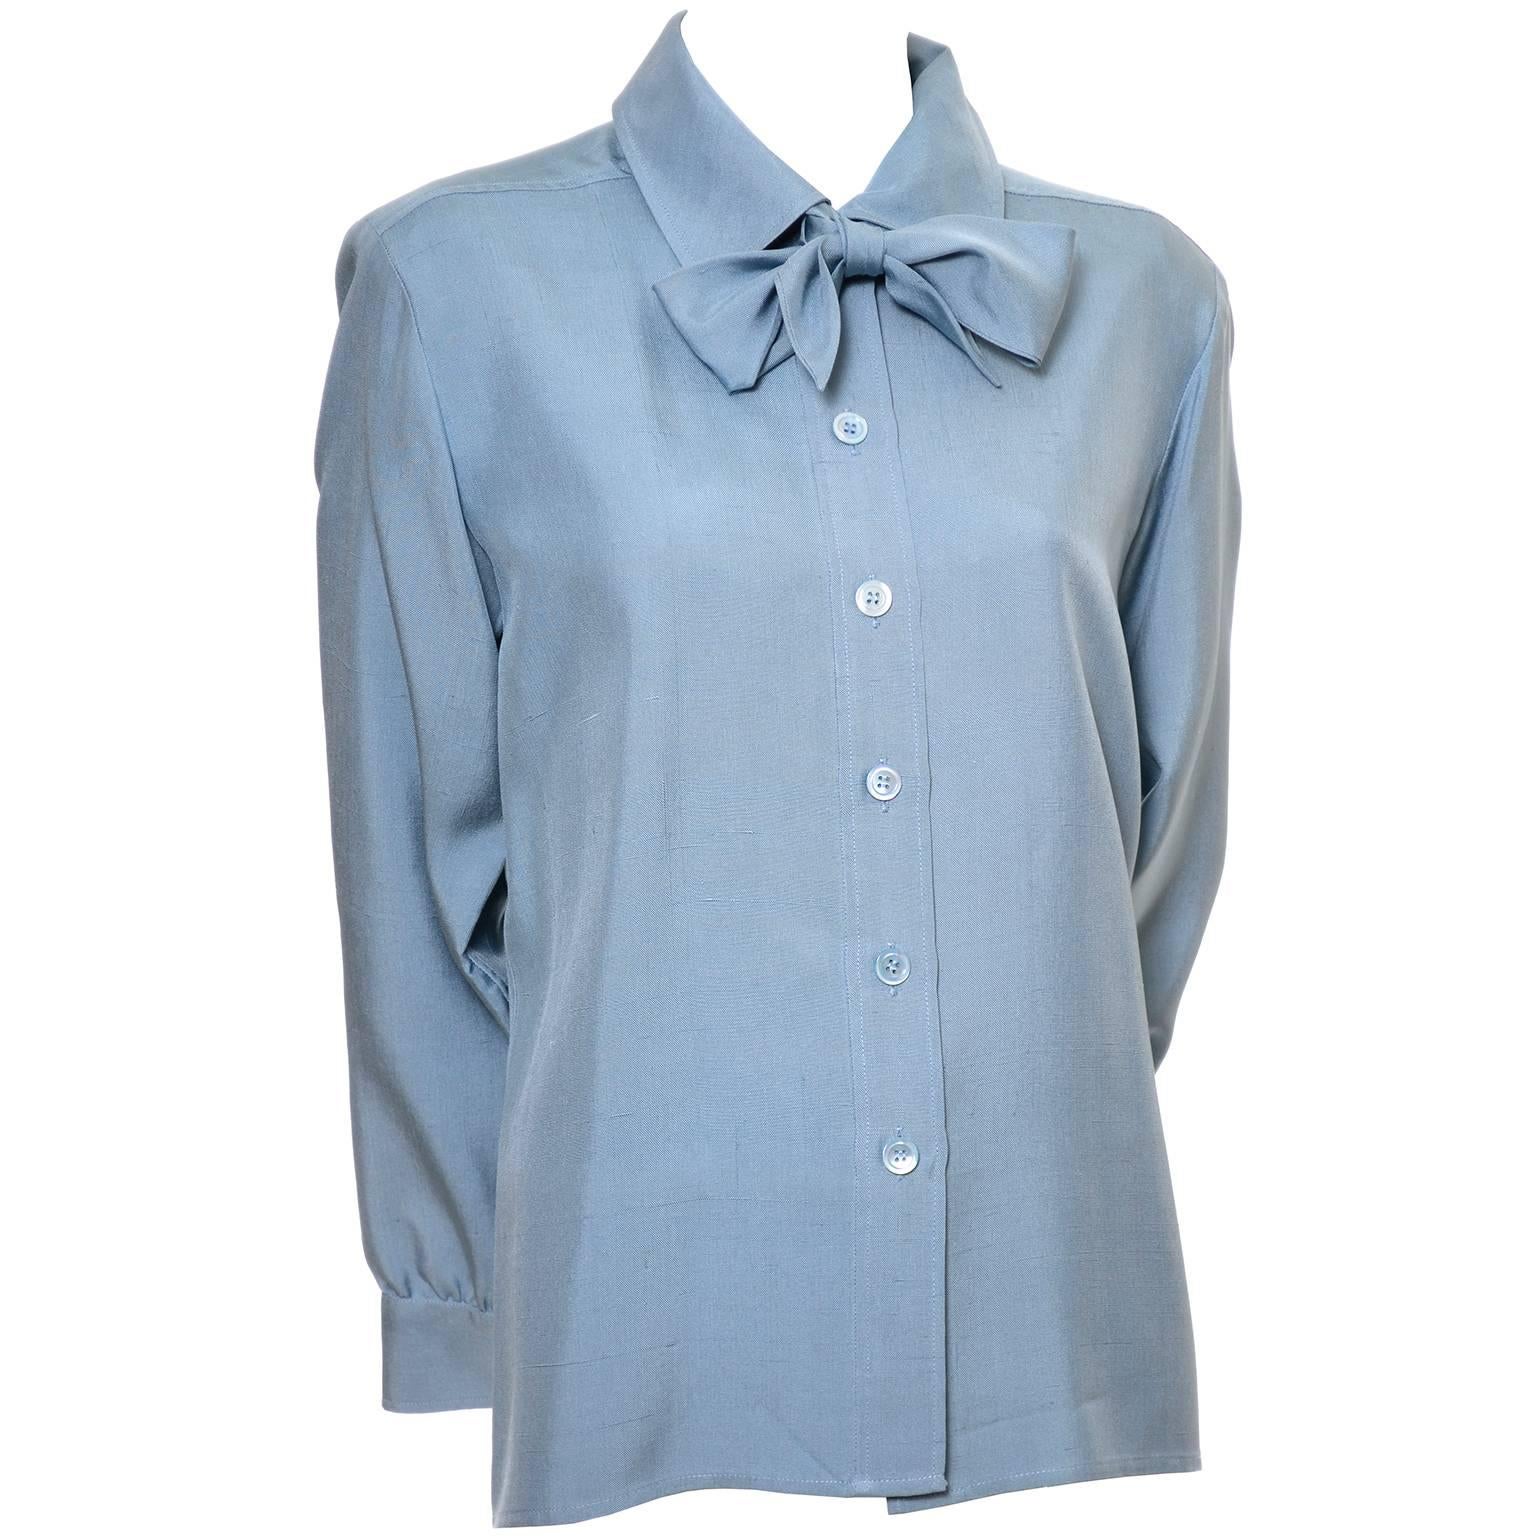 This pretty vintage blue silk blouse was designed by Yves Saint Laurent in the late 1970's. This raw silk button front blouse has a a tie at the neck that can be tied into a knot or a bow.  The blouse is labeled a French size 38 and was made in